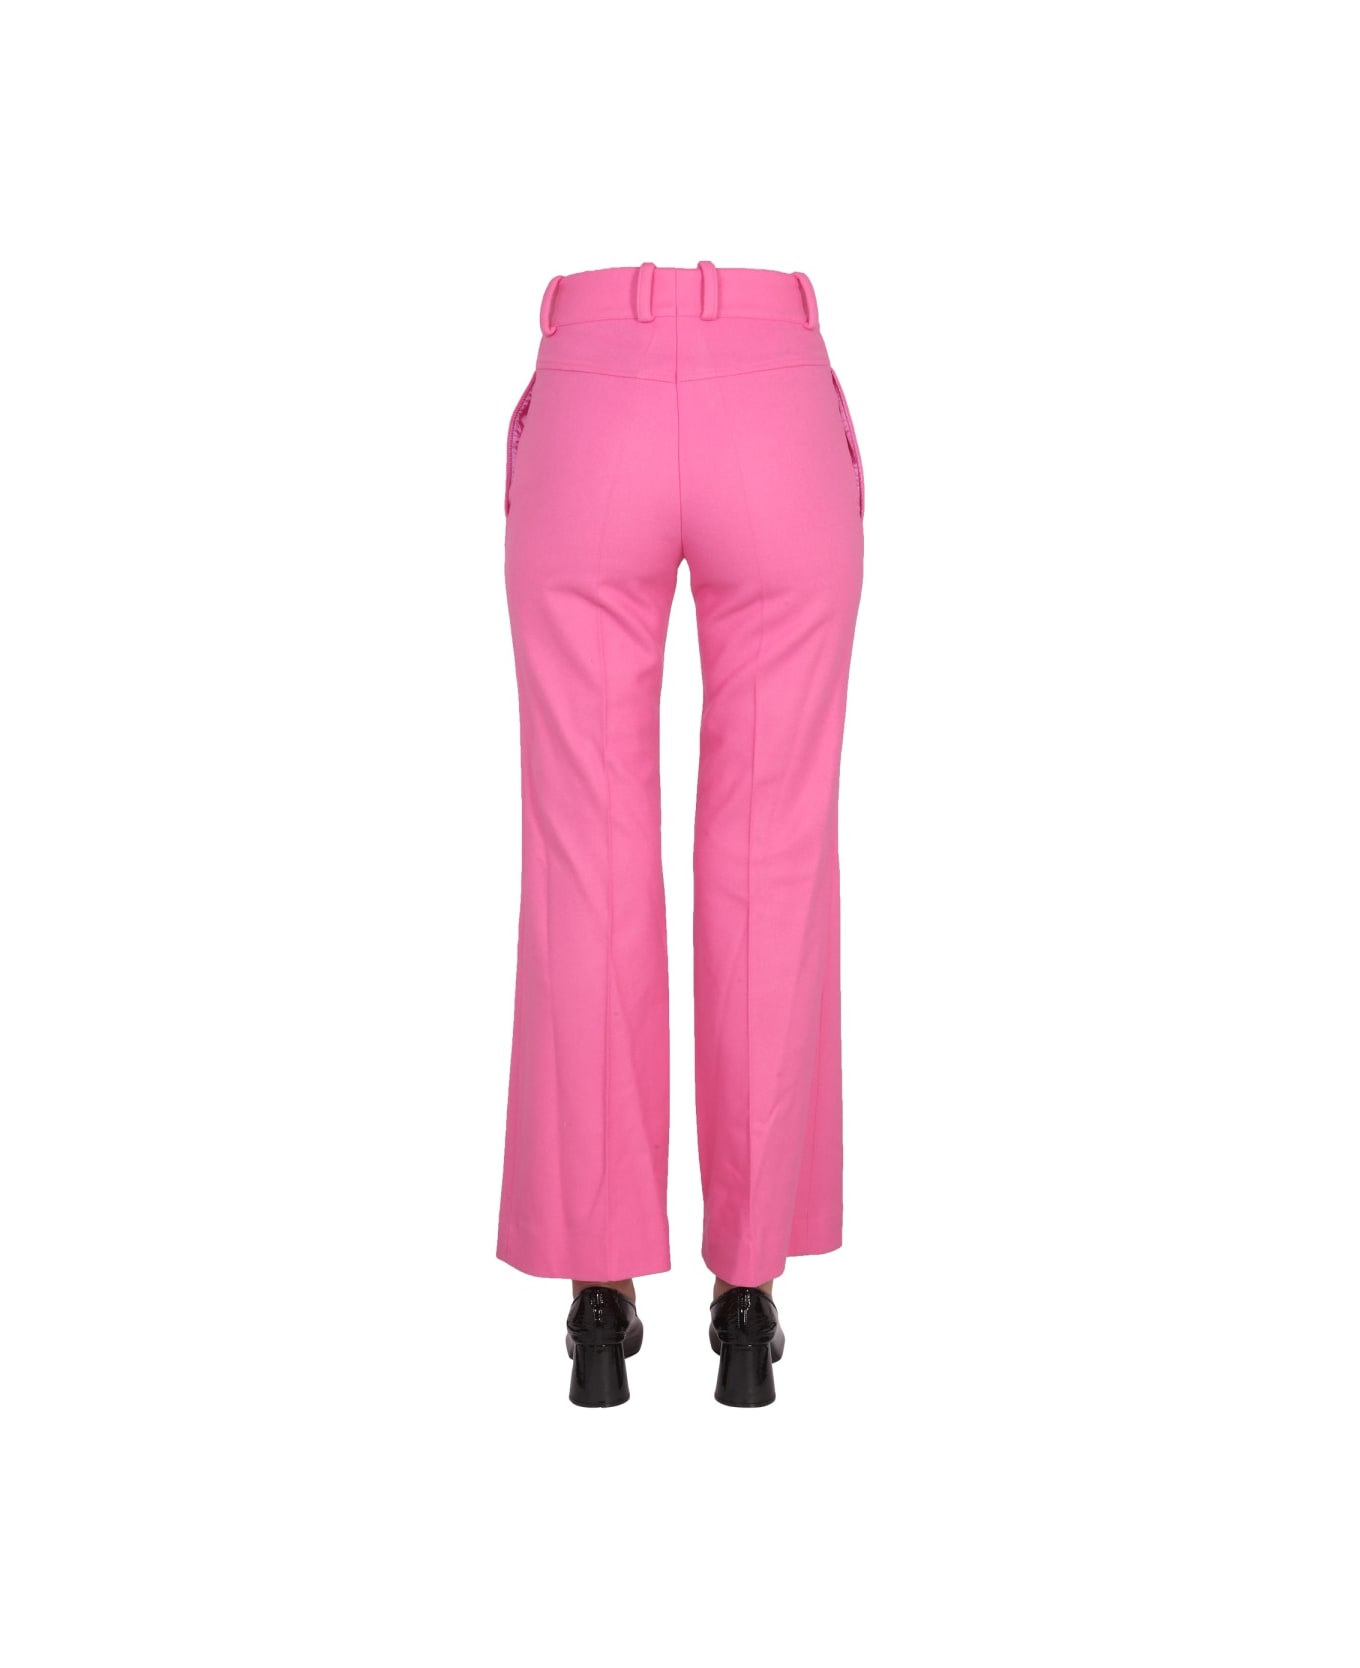 Patou Bell Bottoms - PINK ボトムス